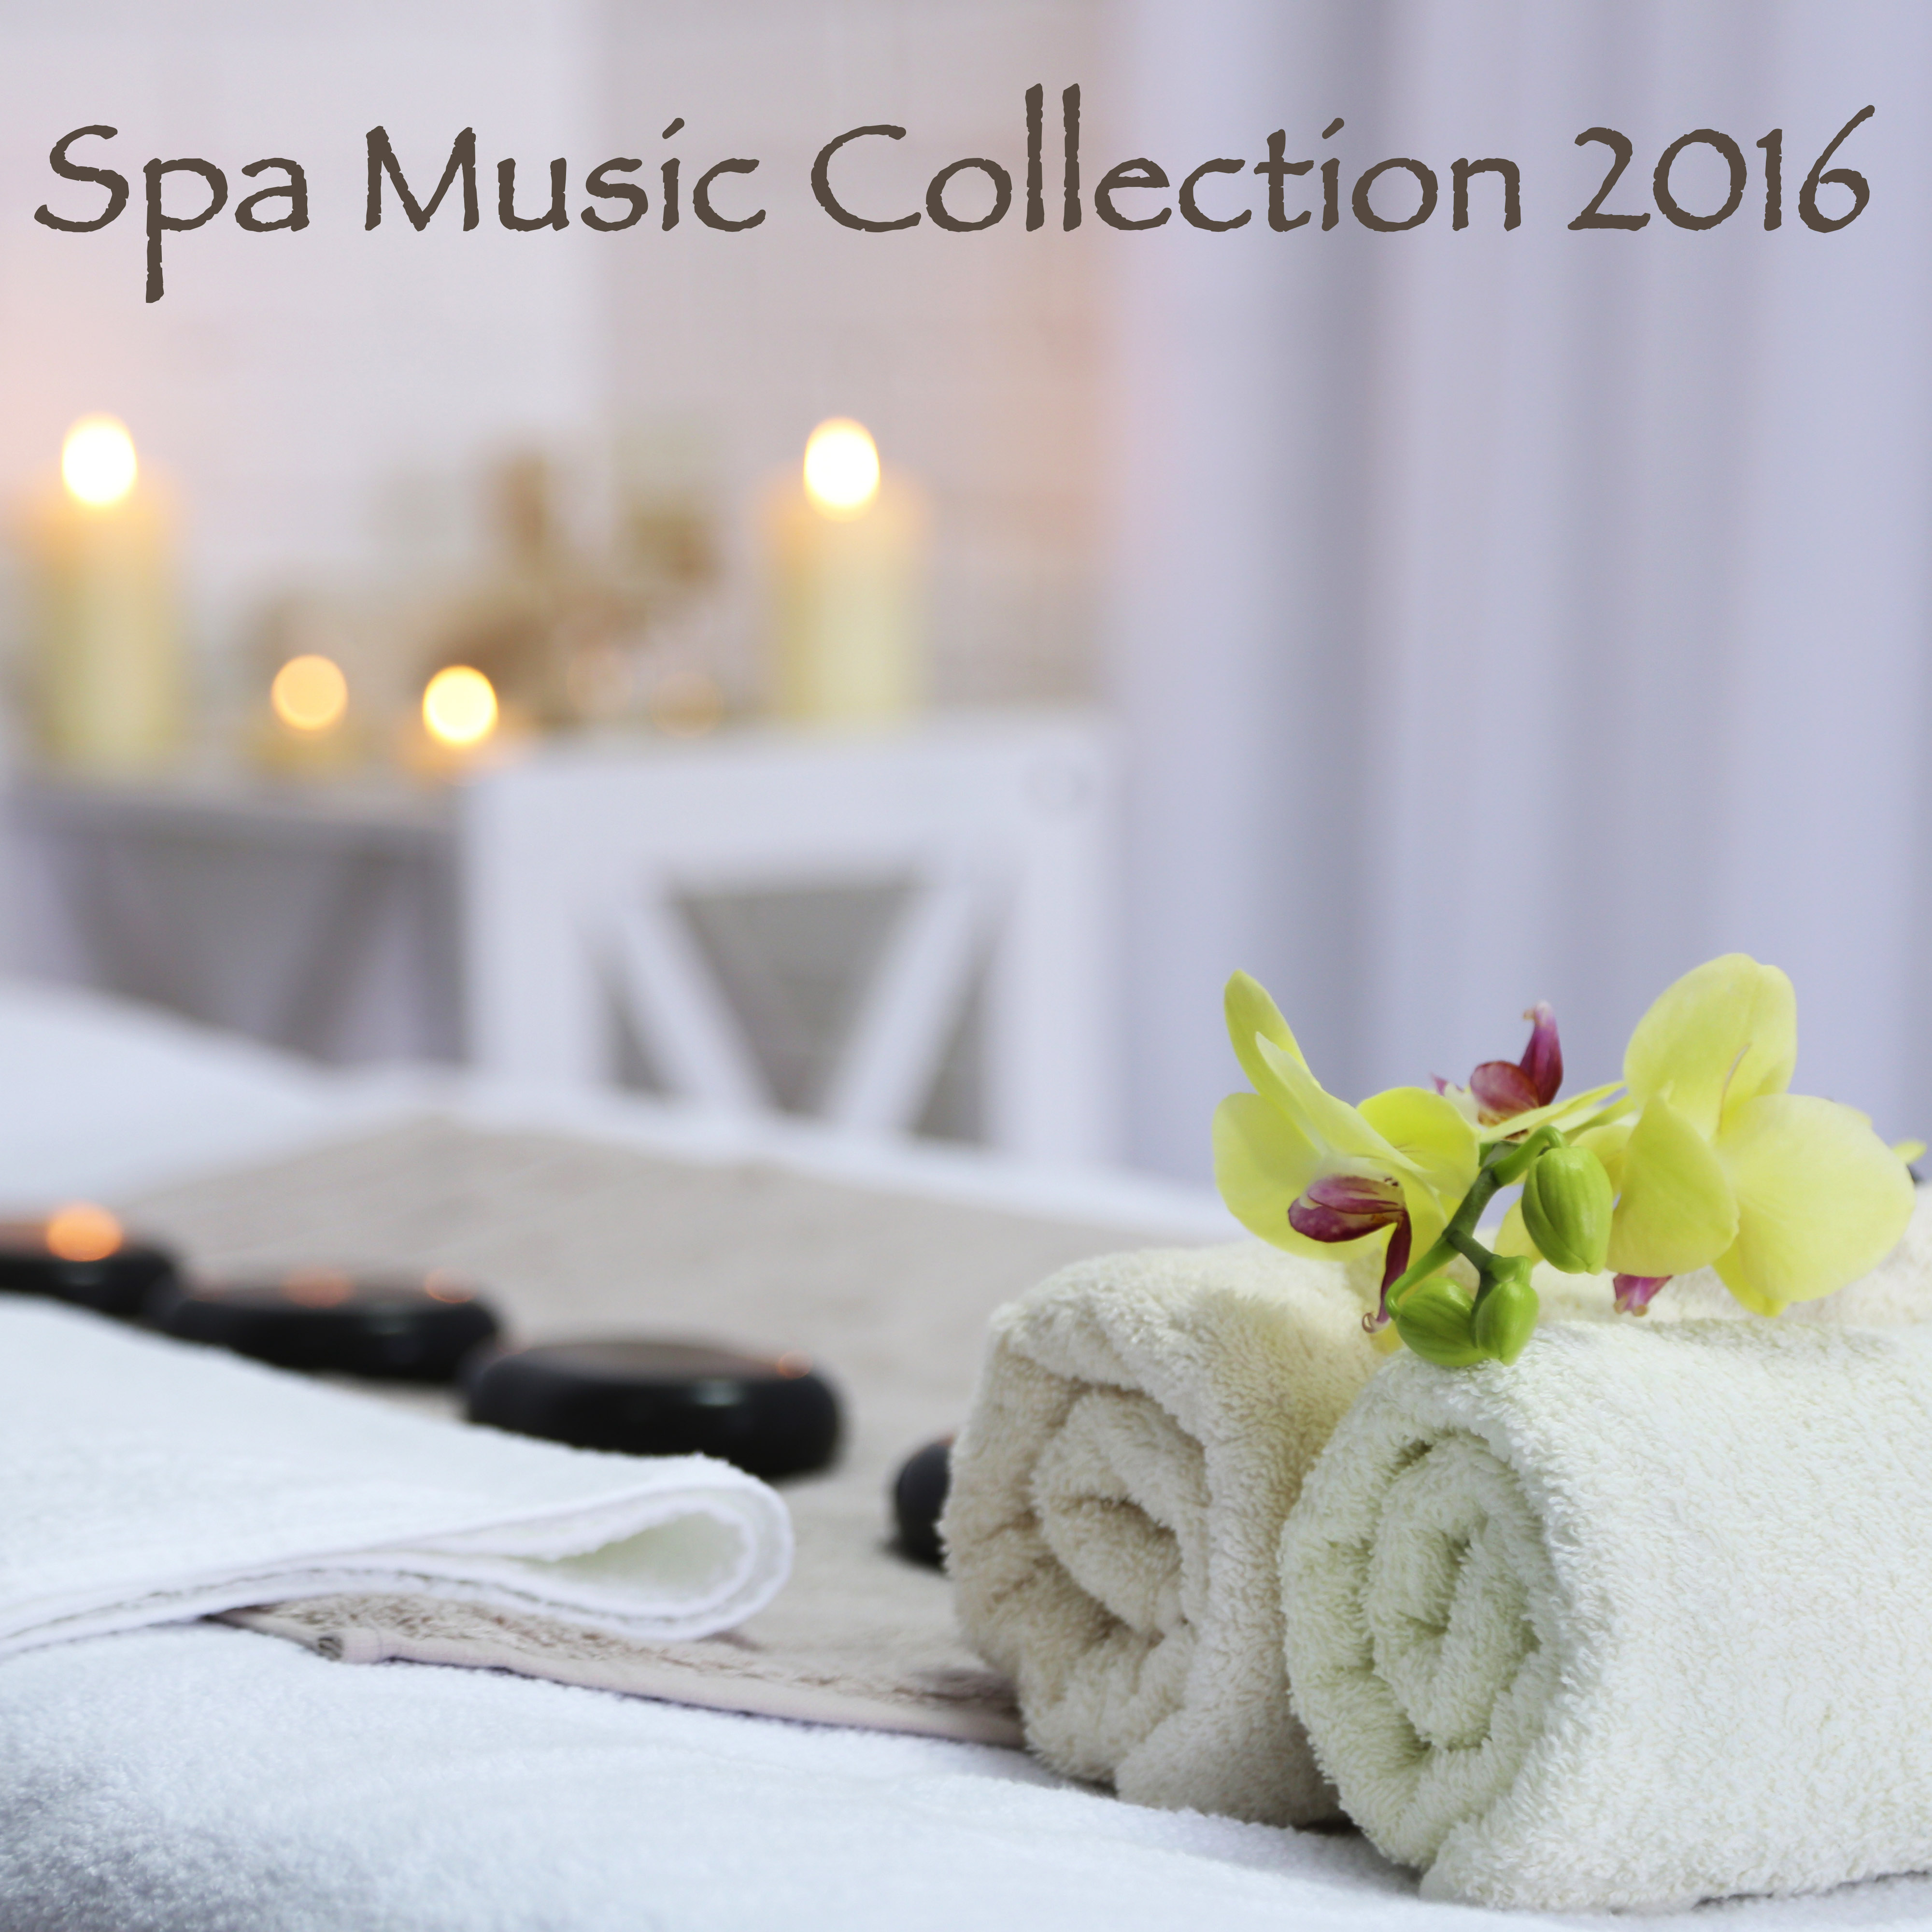 Spa Music Collection 2016 – Day Spa, Best New Spa Sounds for Relaxing Spa Day at Home